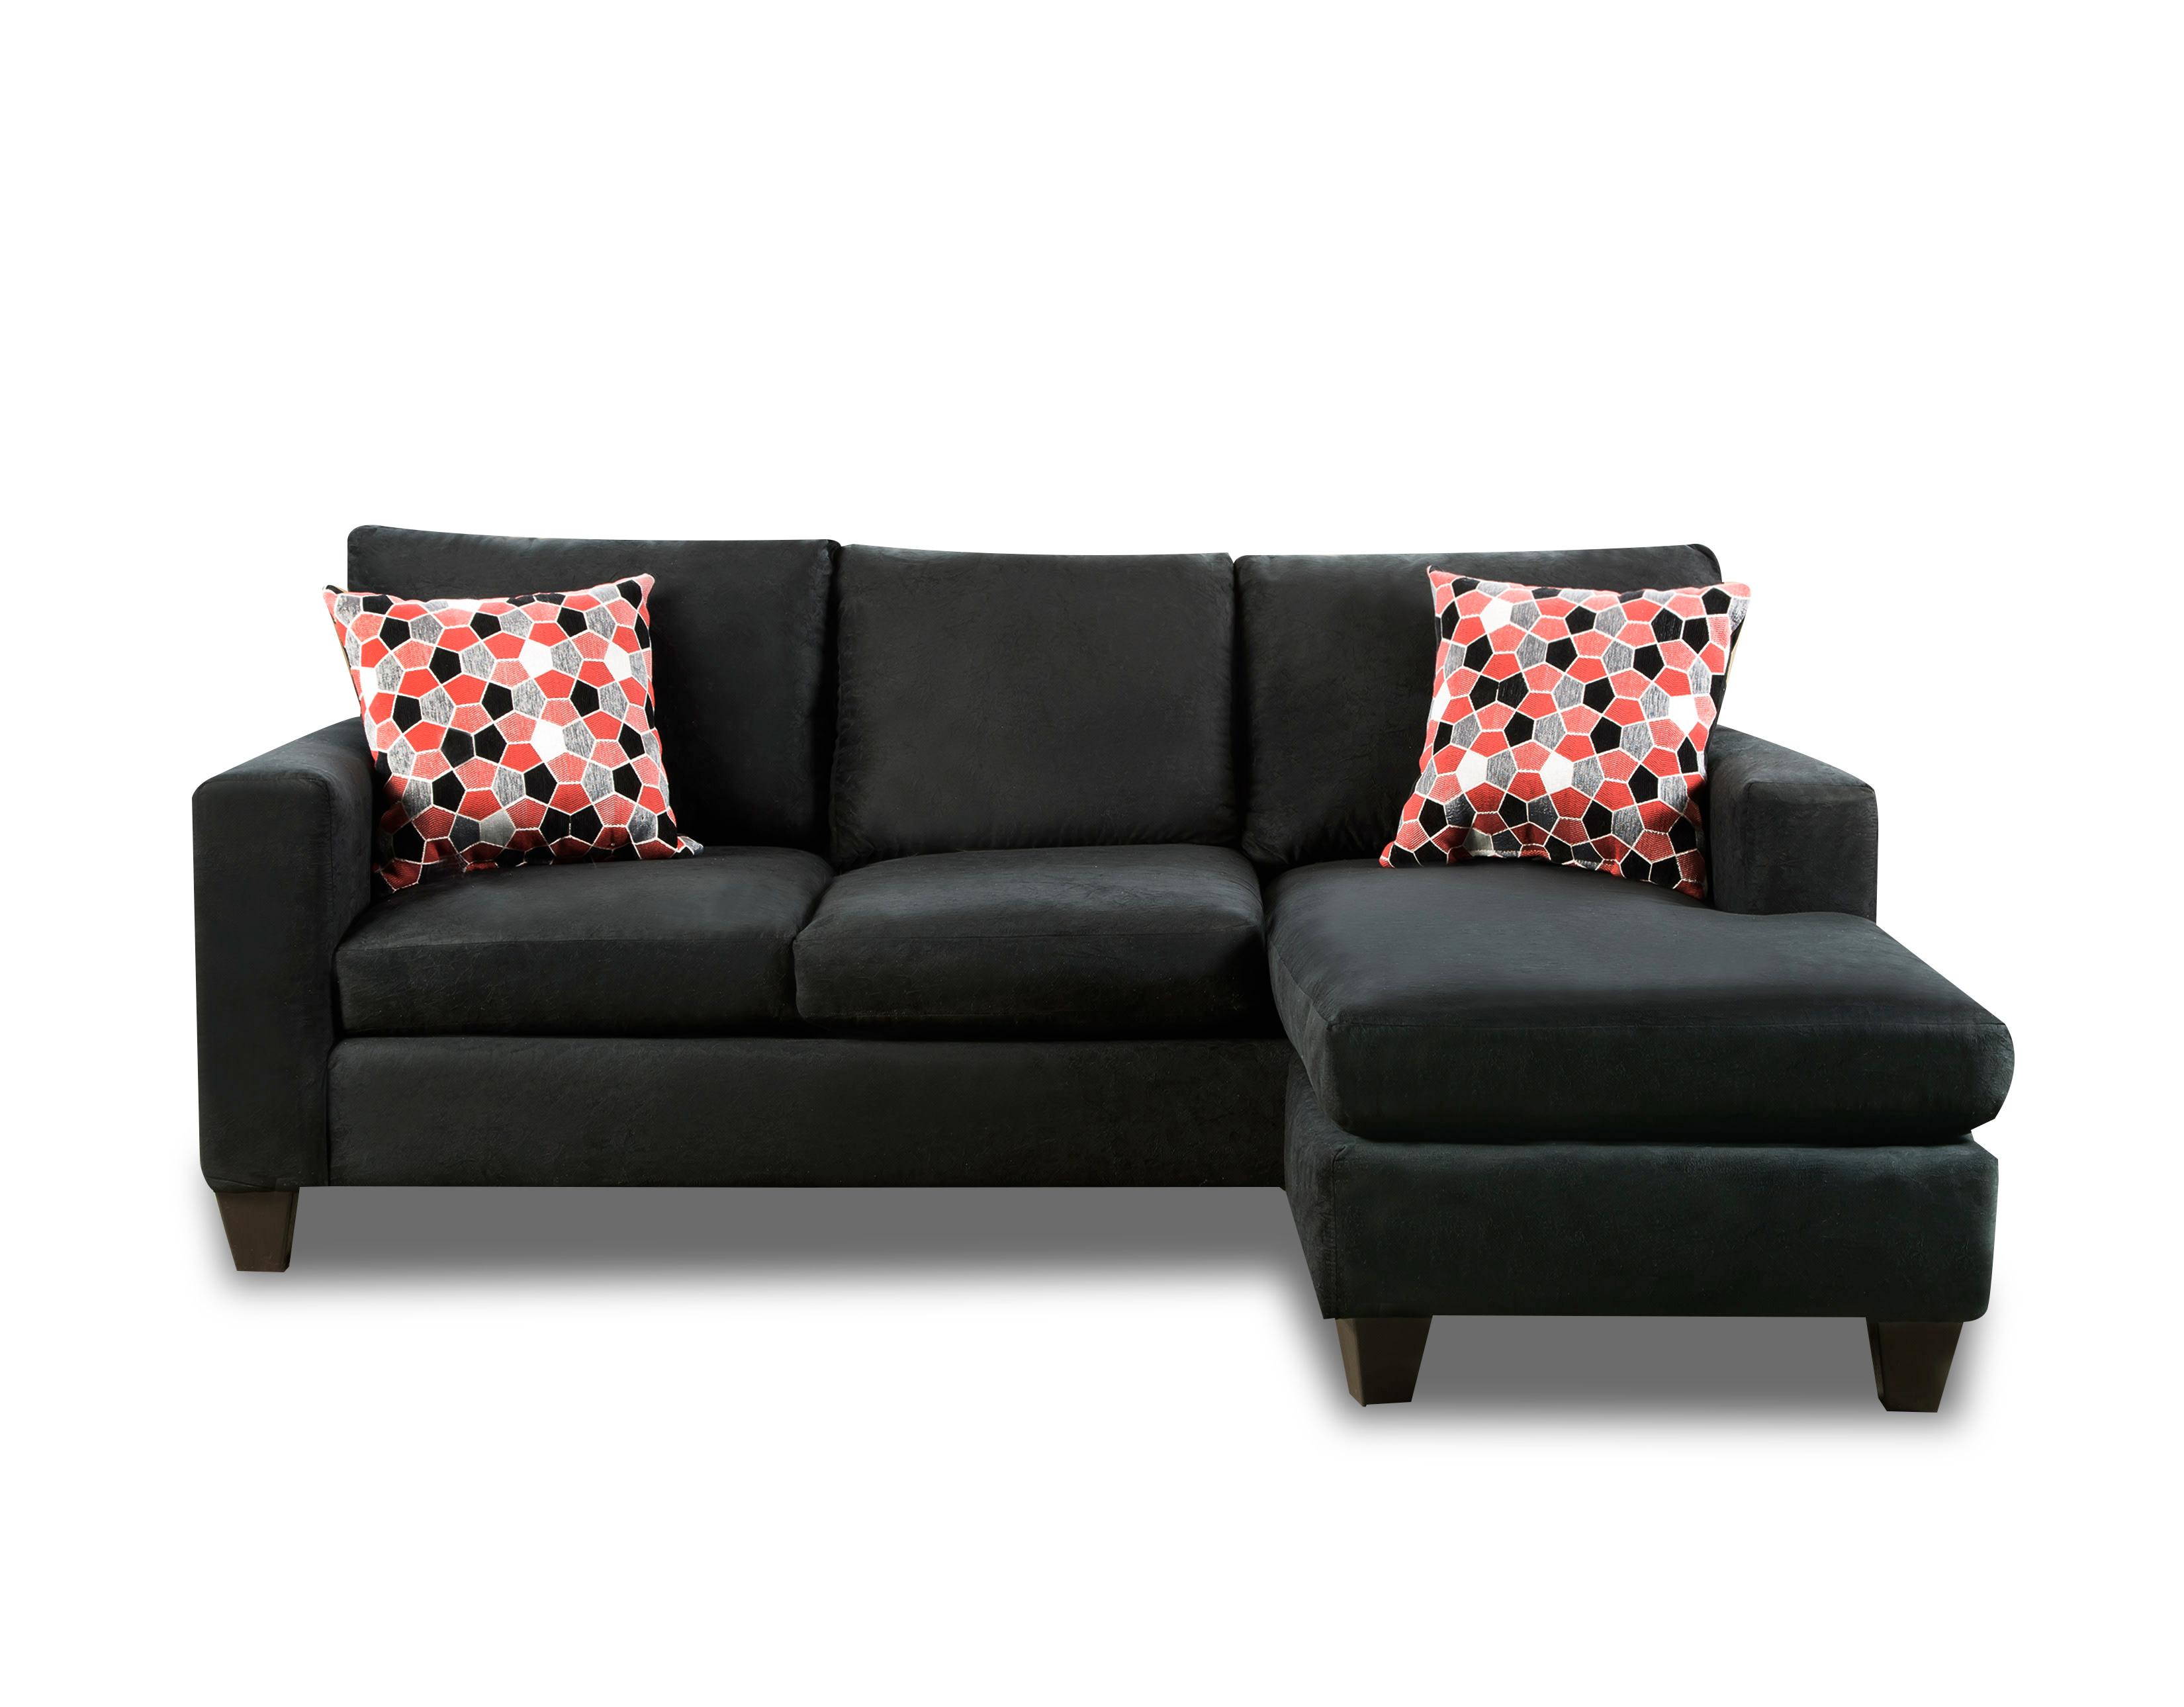 Pash Black 2-Piece Sofa Chaise with Reversible Ottoman